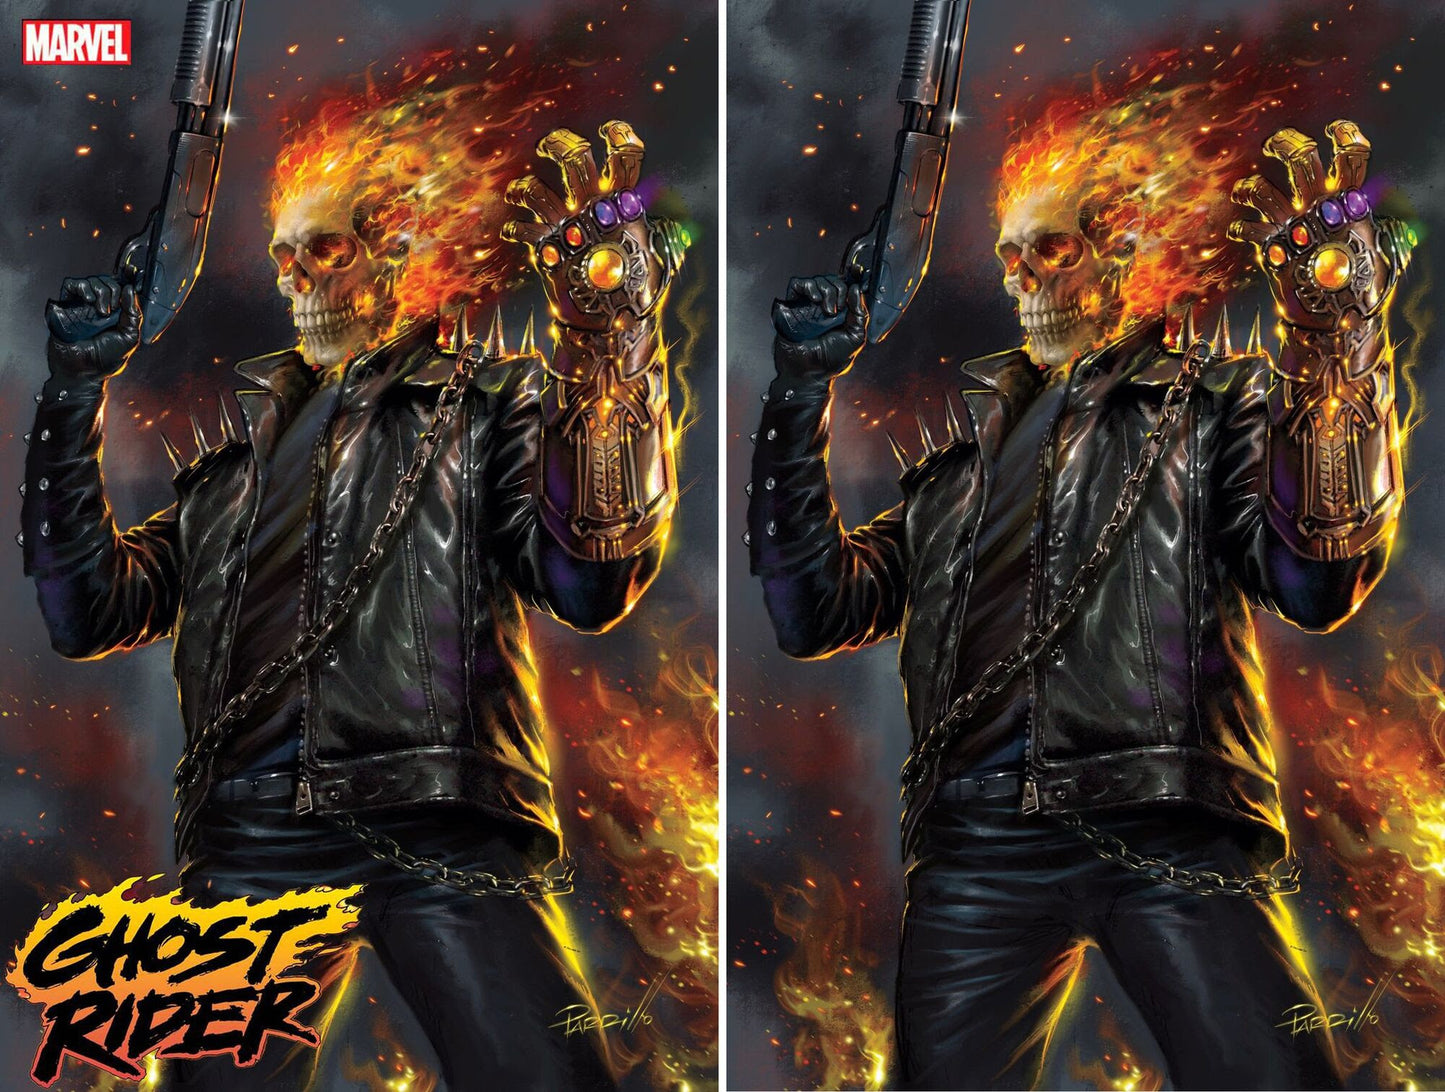 GHOST RIDER #1 LUCIO PARRILLO TRADE/VIRGIN VARIANT SET LIMITED TO 1000 SETS